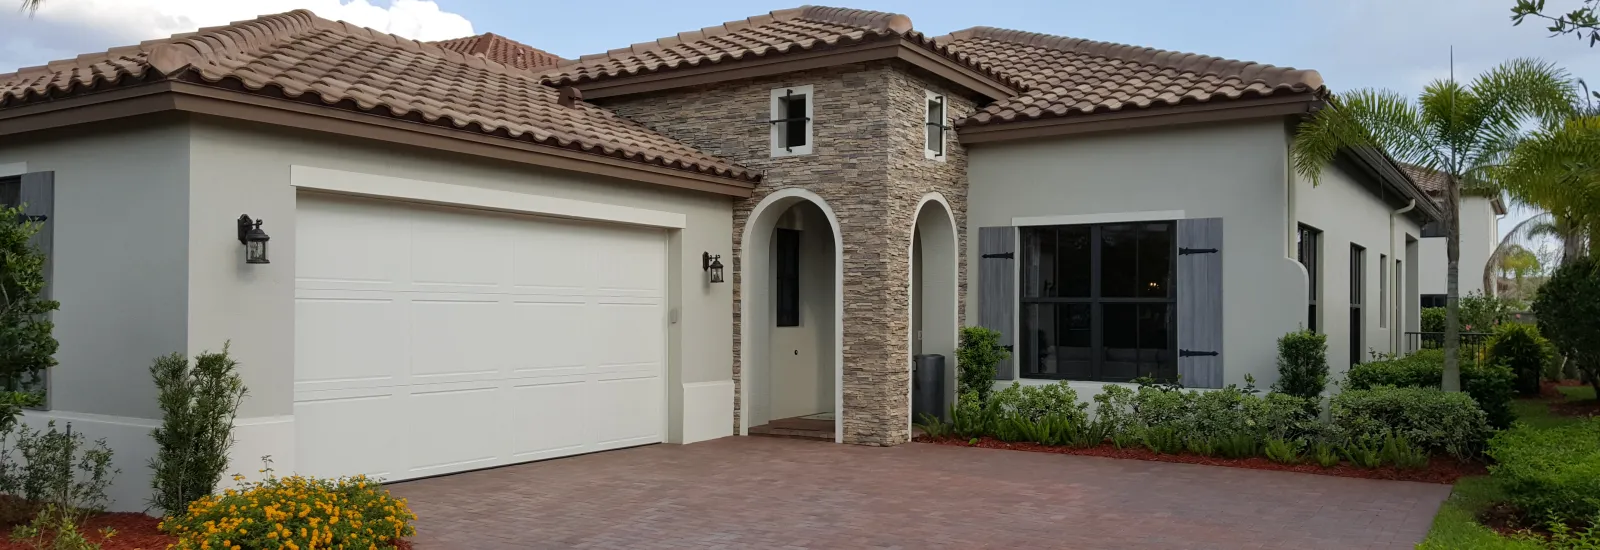 Pembroke Pines Roofing Services